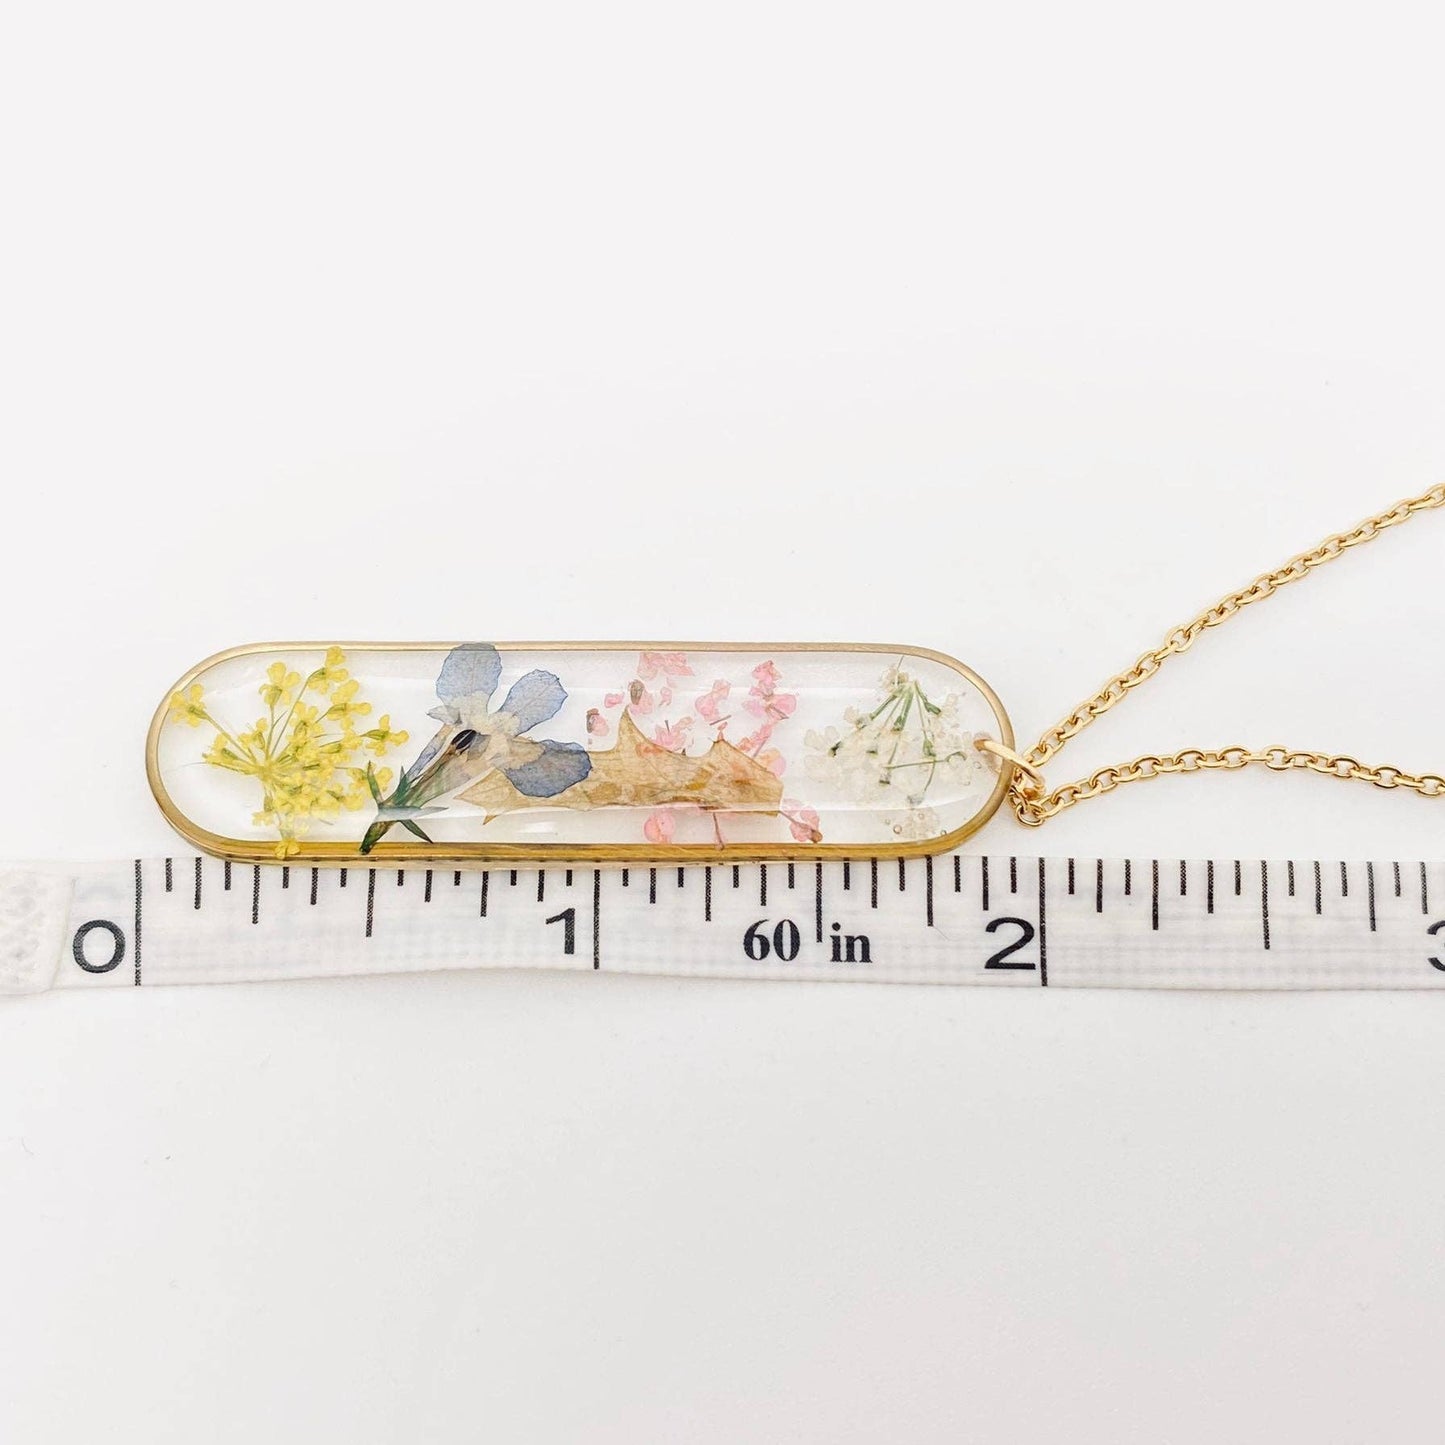 Long Ellipse Charm Dried Flowers Stainless Steel Necklace